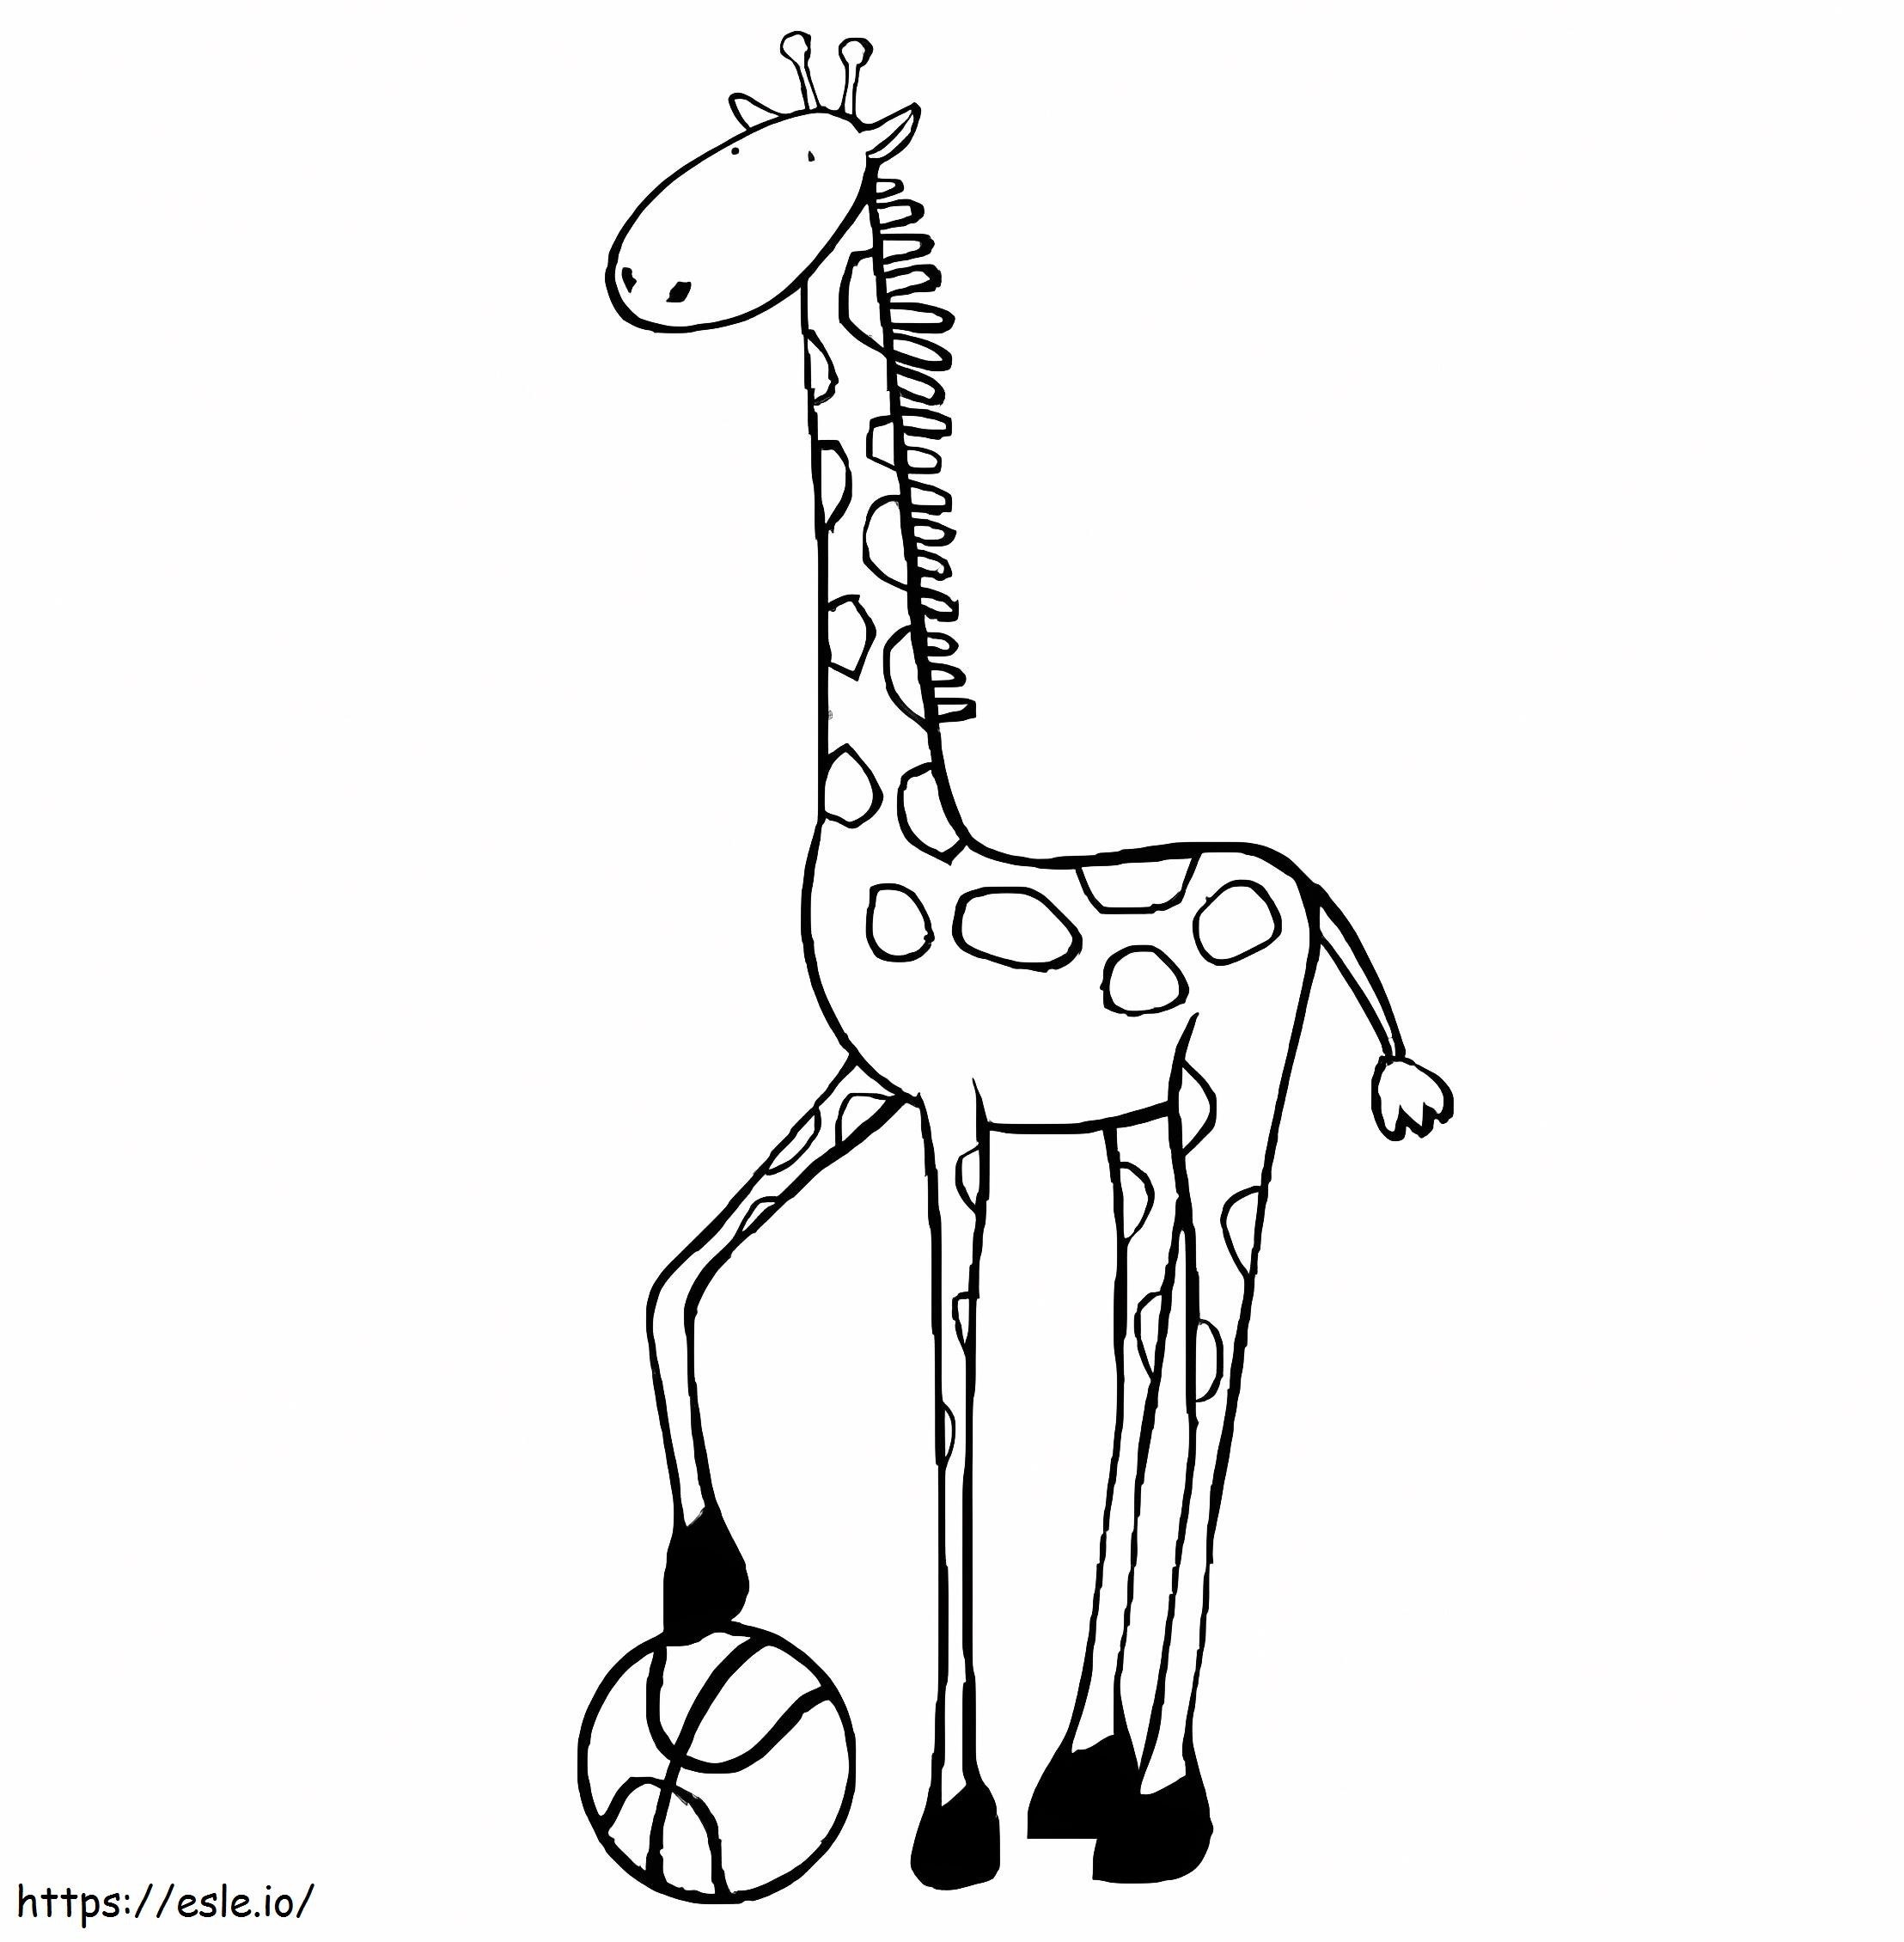 Giraffe With Ball coloring page